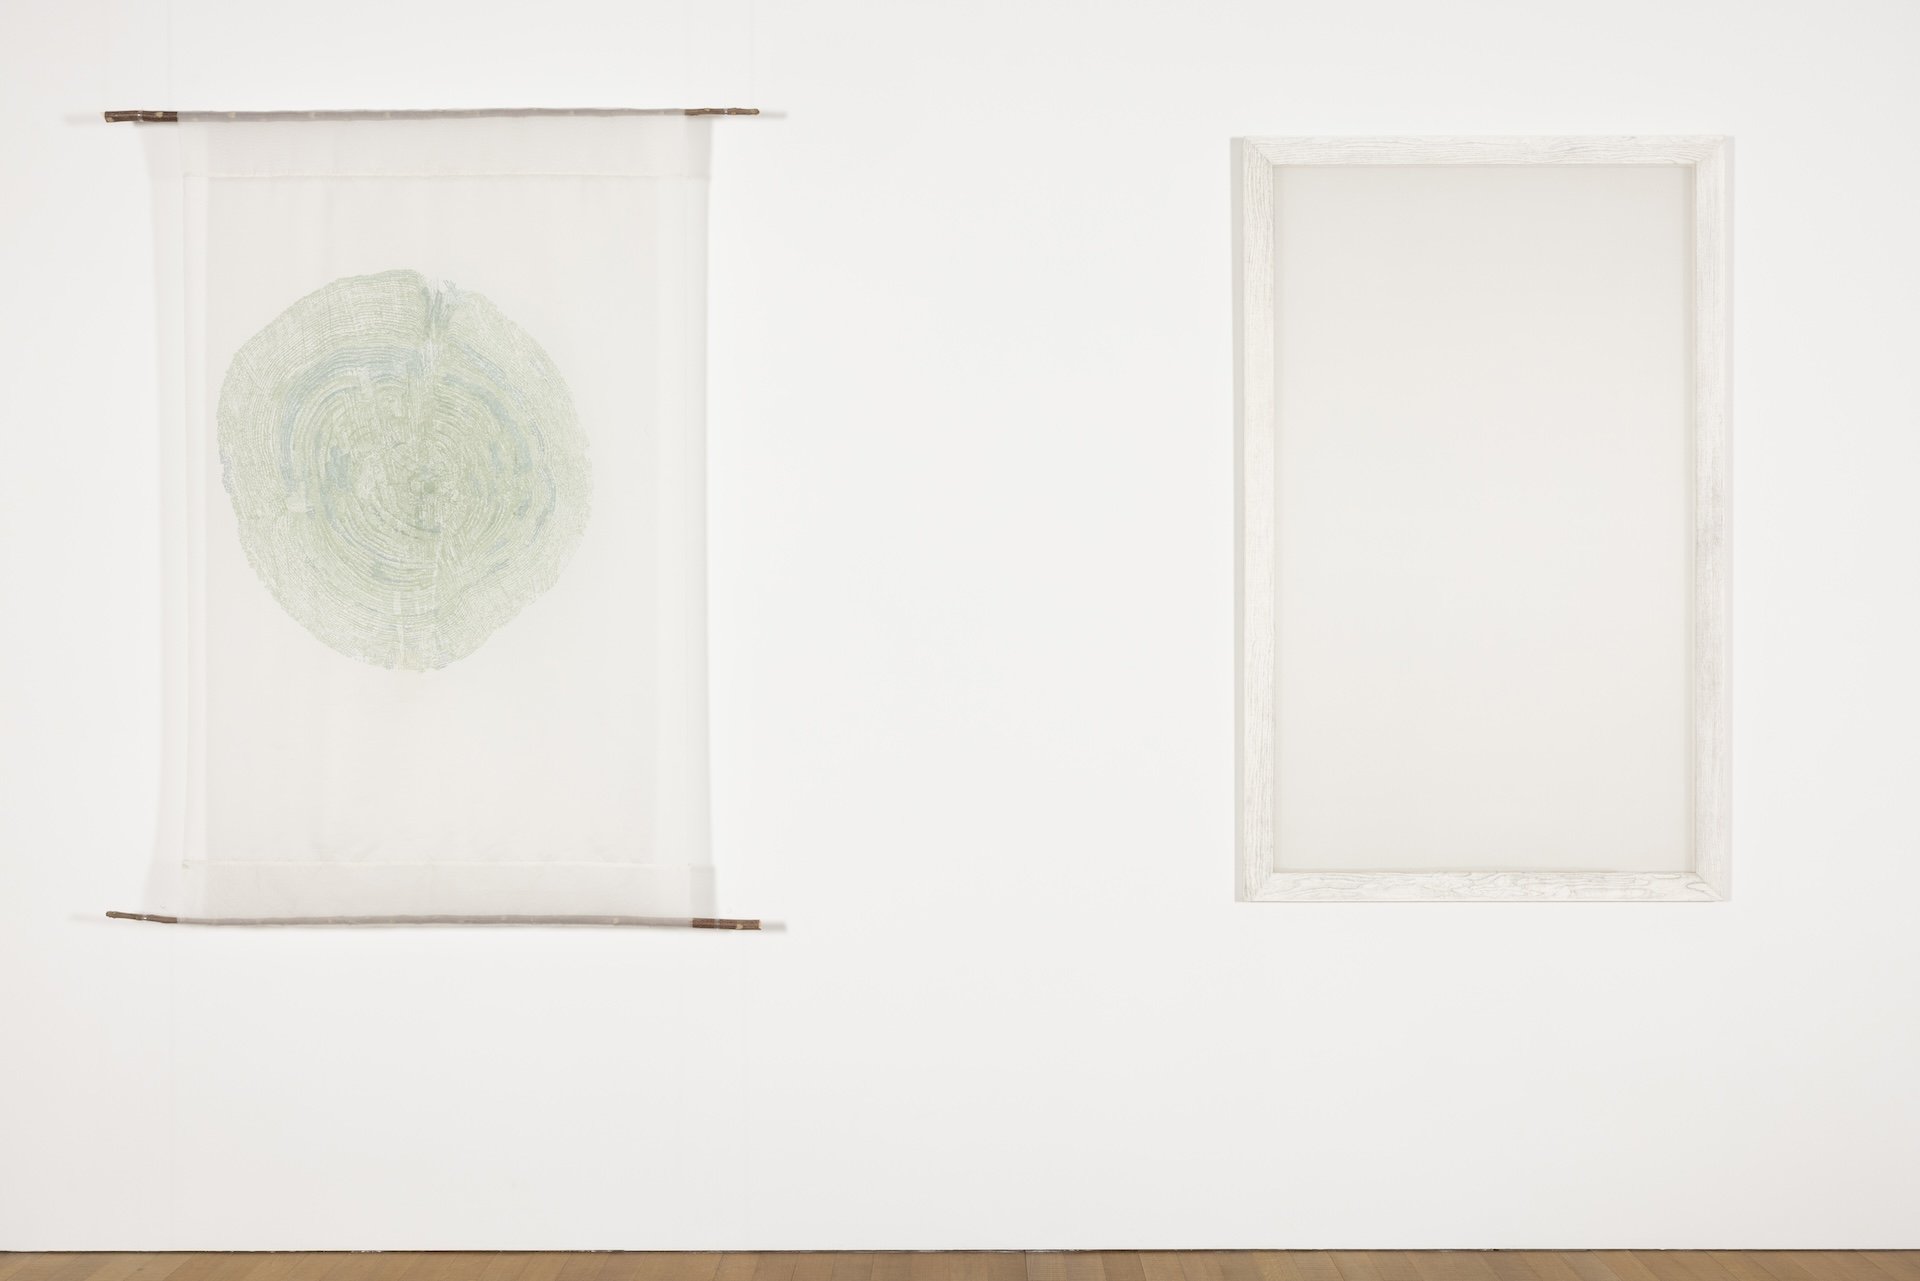 Two rectangular paintings hang on the white wall. The left work is a piece of translucent white silk painted with the circular cross-section of a green tree trunk and with horizontal wooden rods sewn at the top and bottom. The right work is a piece of translucent white silk mounted on a white wooden frame.